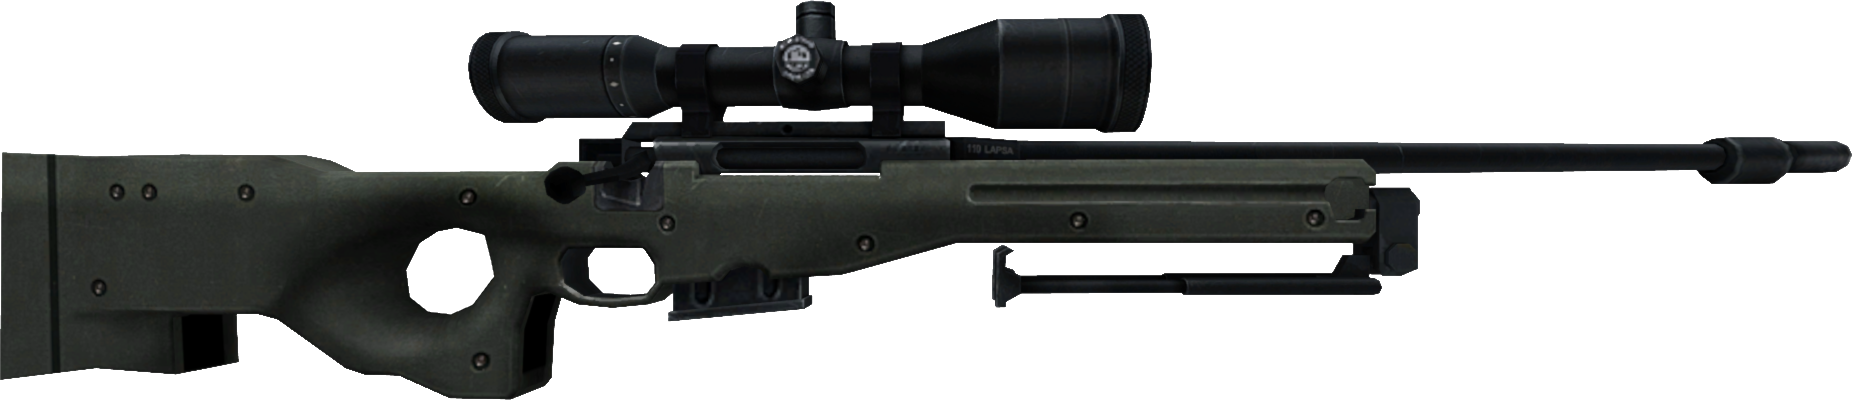 Zewikia_weapon_sniperrifle_awp_css.png